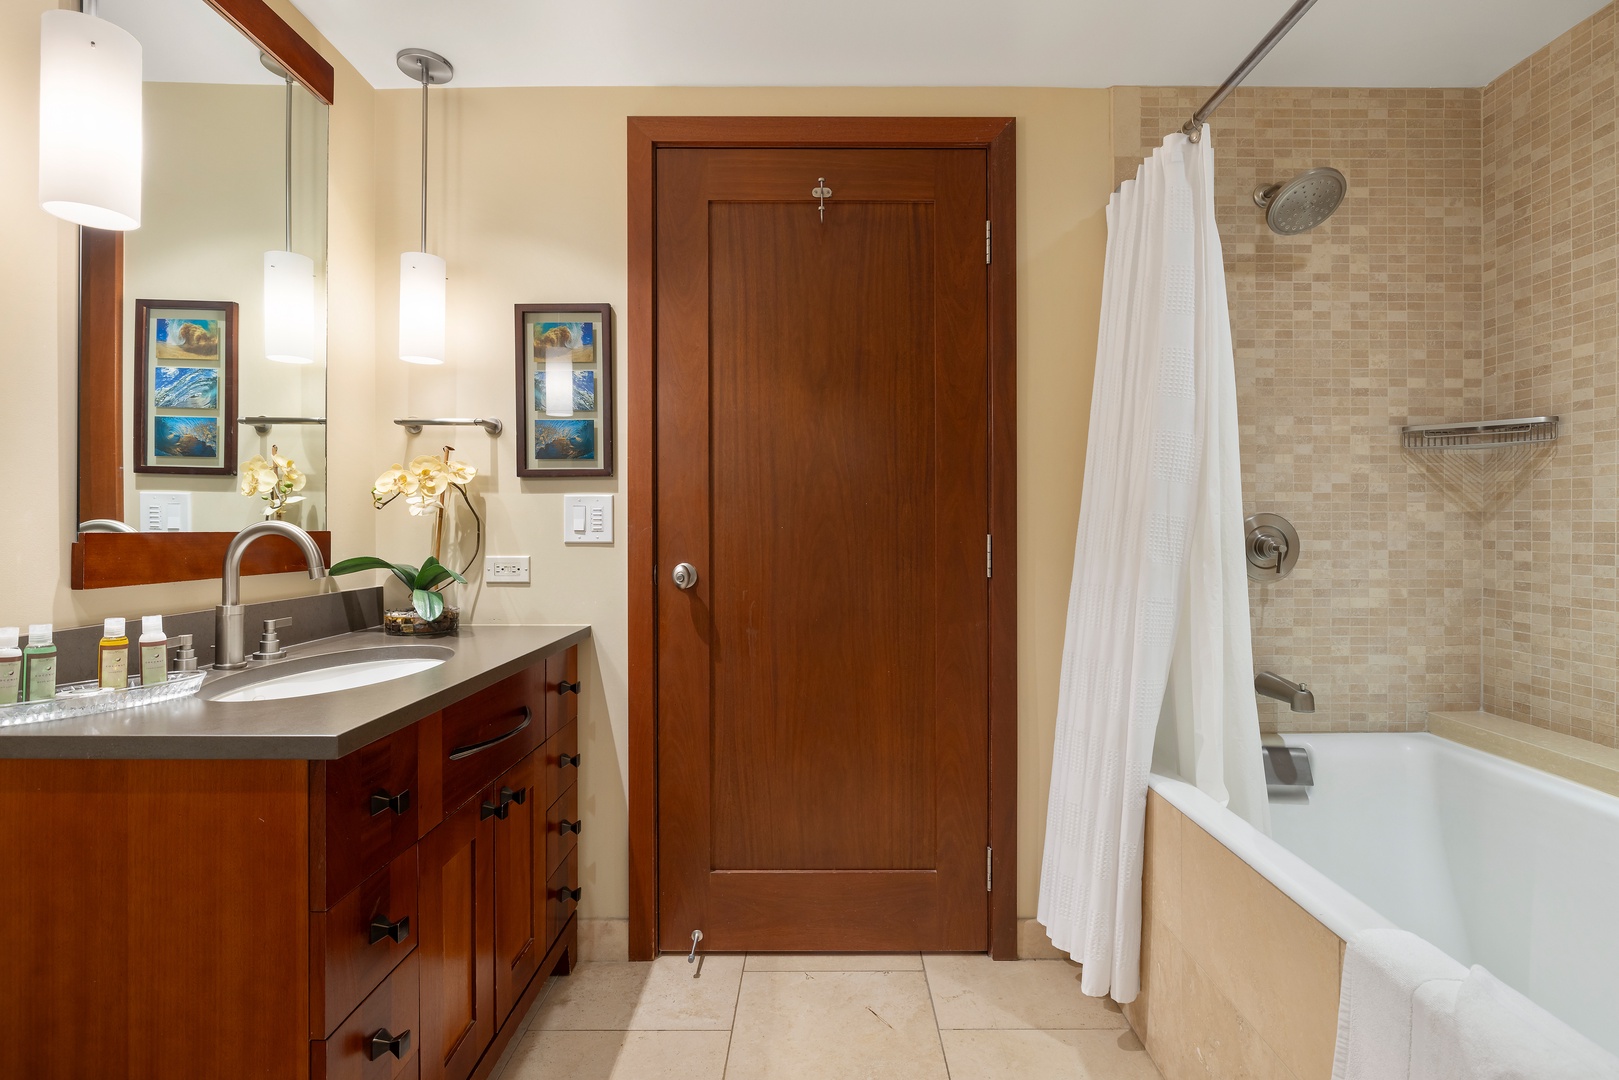 Kapolei Vacation Rentals, Ko Olina Beach Villas O805 - Island vibes in the second shared bathroom with a shower/tub combo.